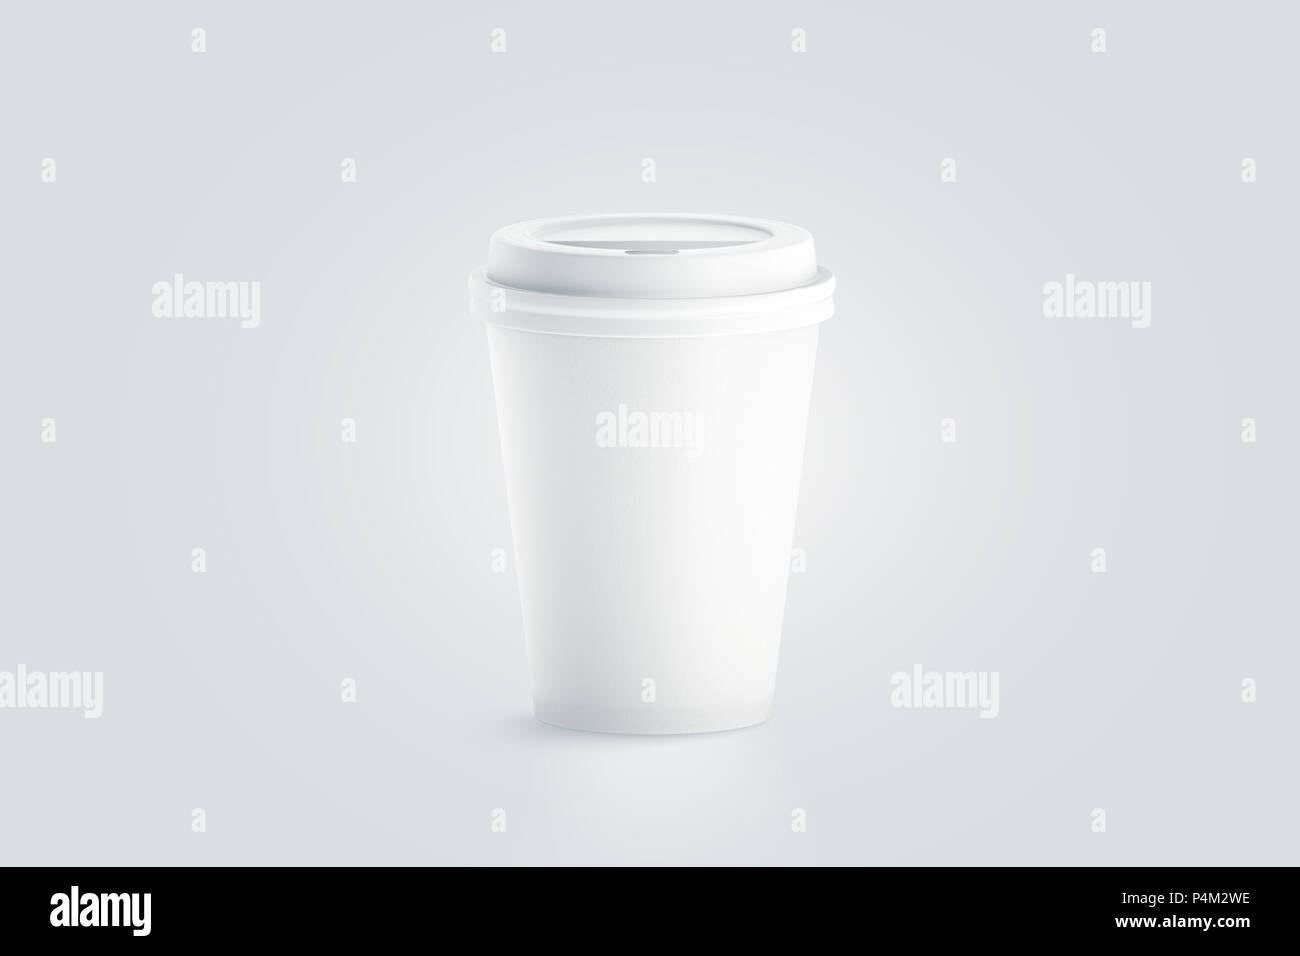 https://c8.alamy.com/comp/P4M2WE/blank-white-disposable-paper-cup-with-plastic-lid-mock-up-isolated-3d-rendering-empty-polystyrene-coffee-drinking-mug-mockup-front-view-clear-plain-tea-take-away-package-cofe-branding-template-P4M2WE.jpg